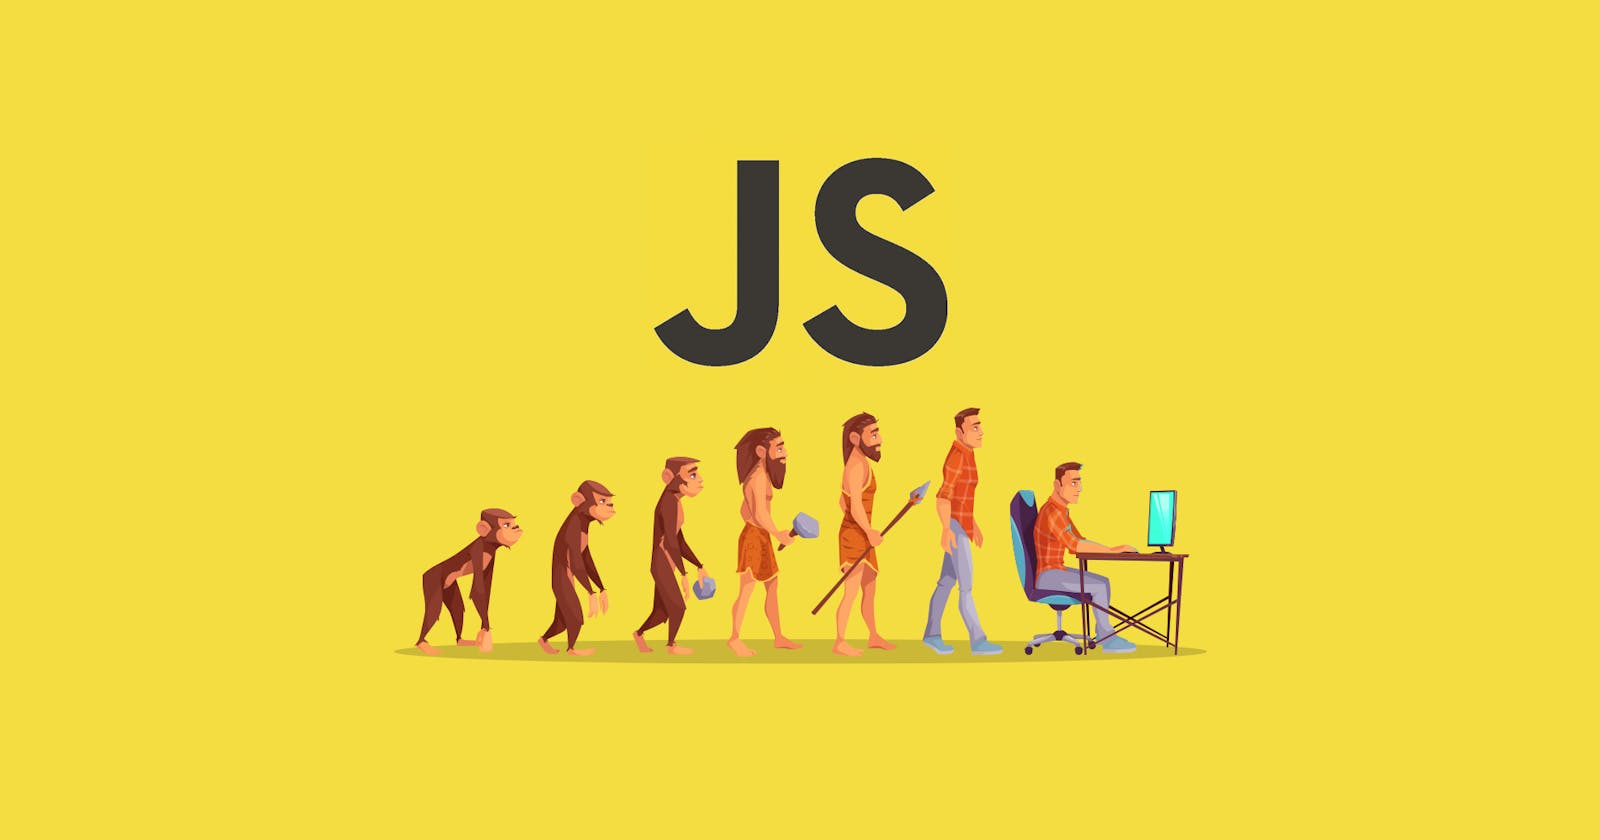 "Tracing the Evolution: A History of JavaScript"